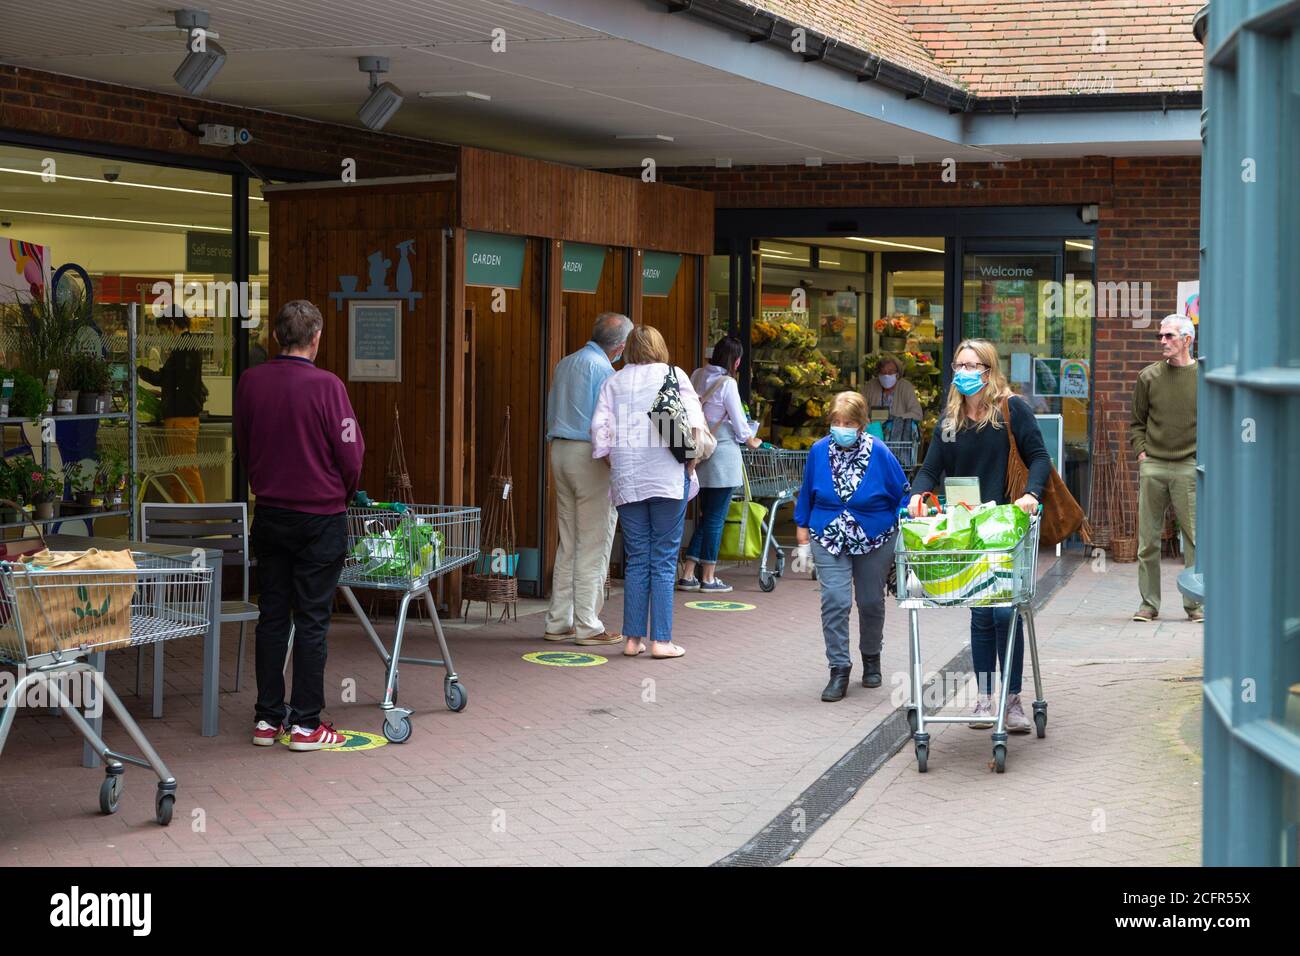 Tenterden, Kent, UK. 7th Sep, 2020. The people of Tenterden in Kent go about their business in the new normal. Queues for shopping with facemasks on. Photo Credit: Paul Lawrenson-PAL Media/Alamy Live News Stock Photo